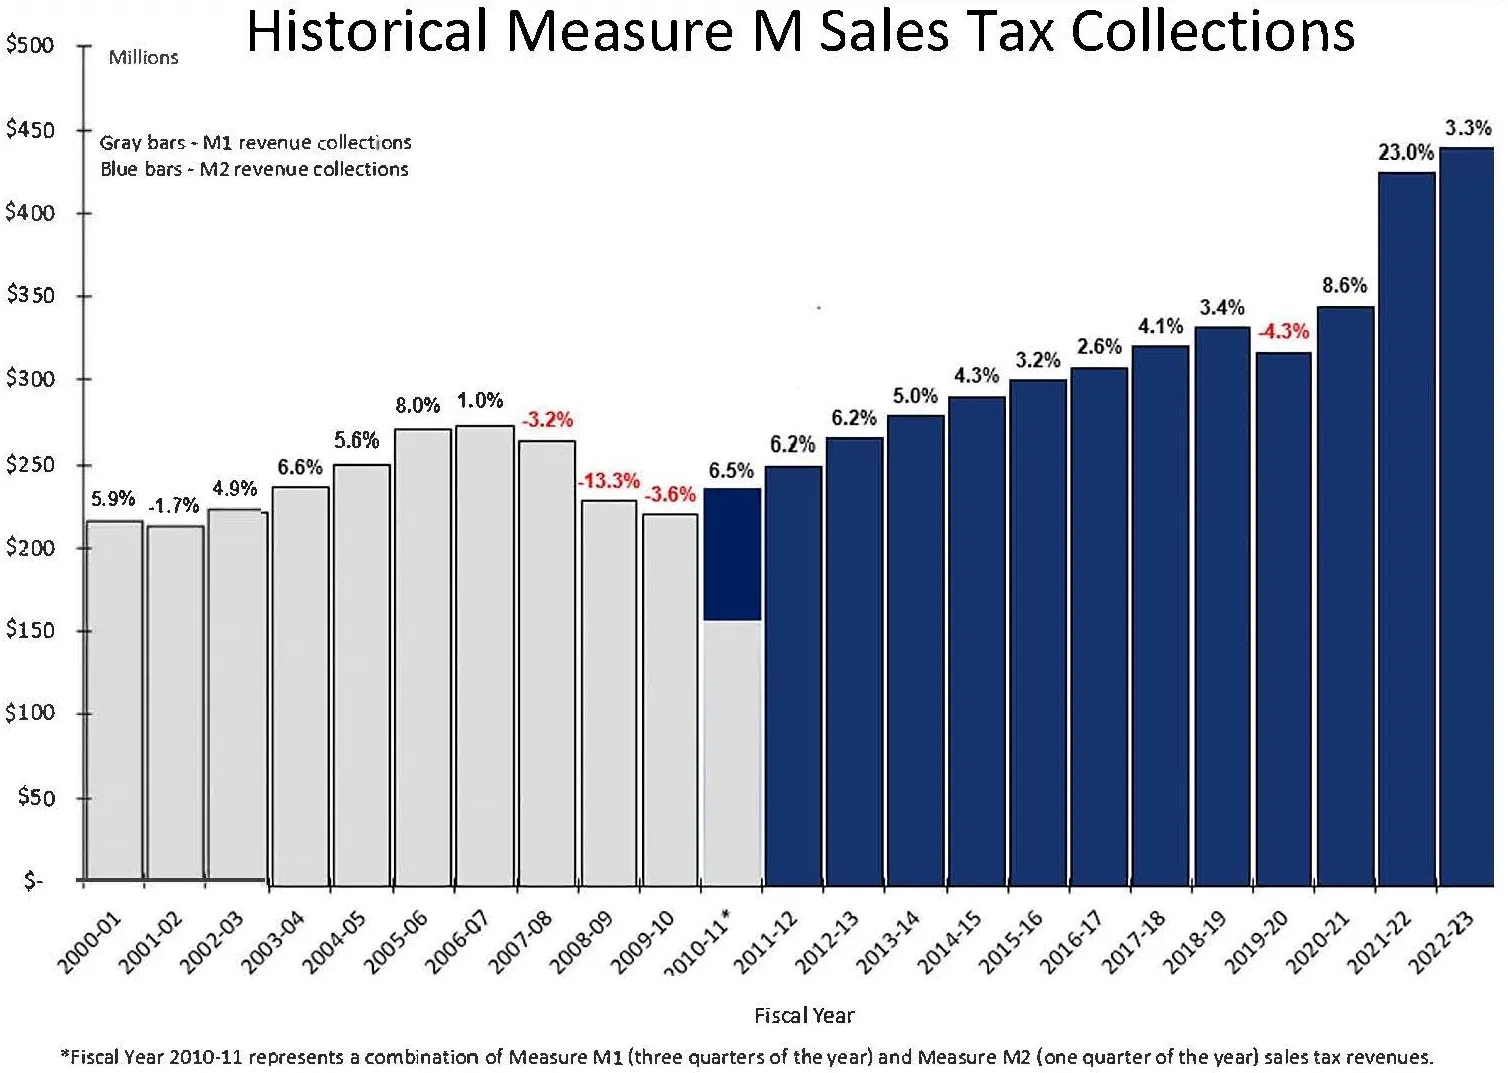 Historical Measure M Sales Tax Collections